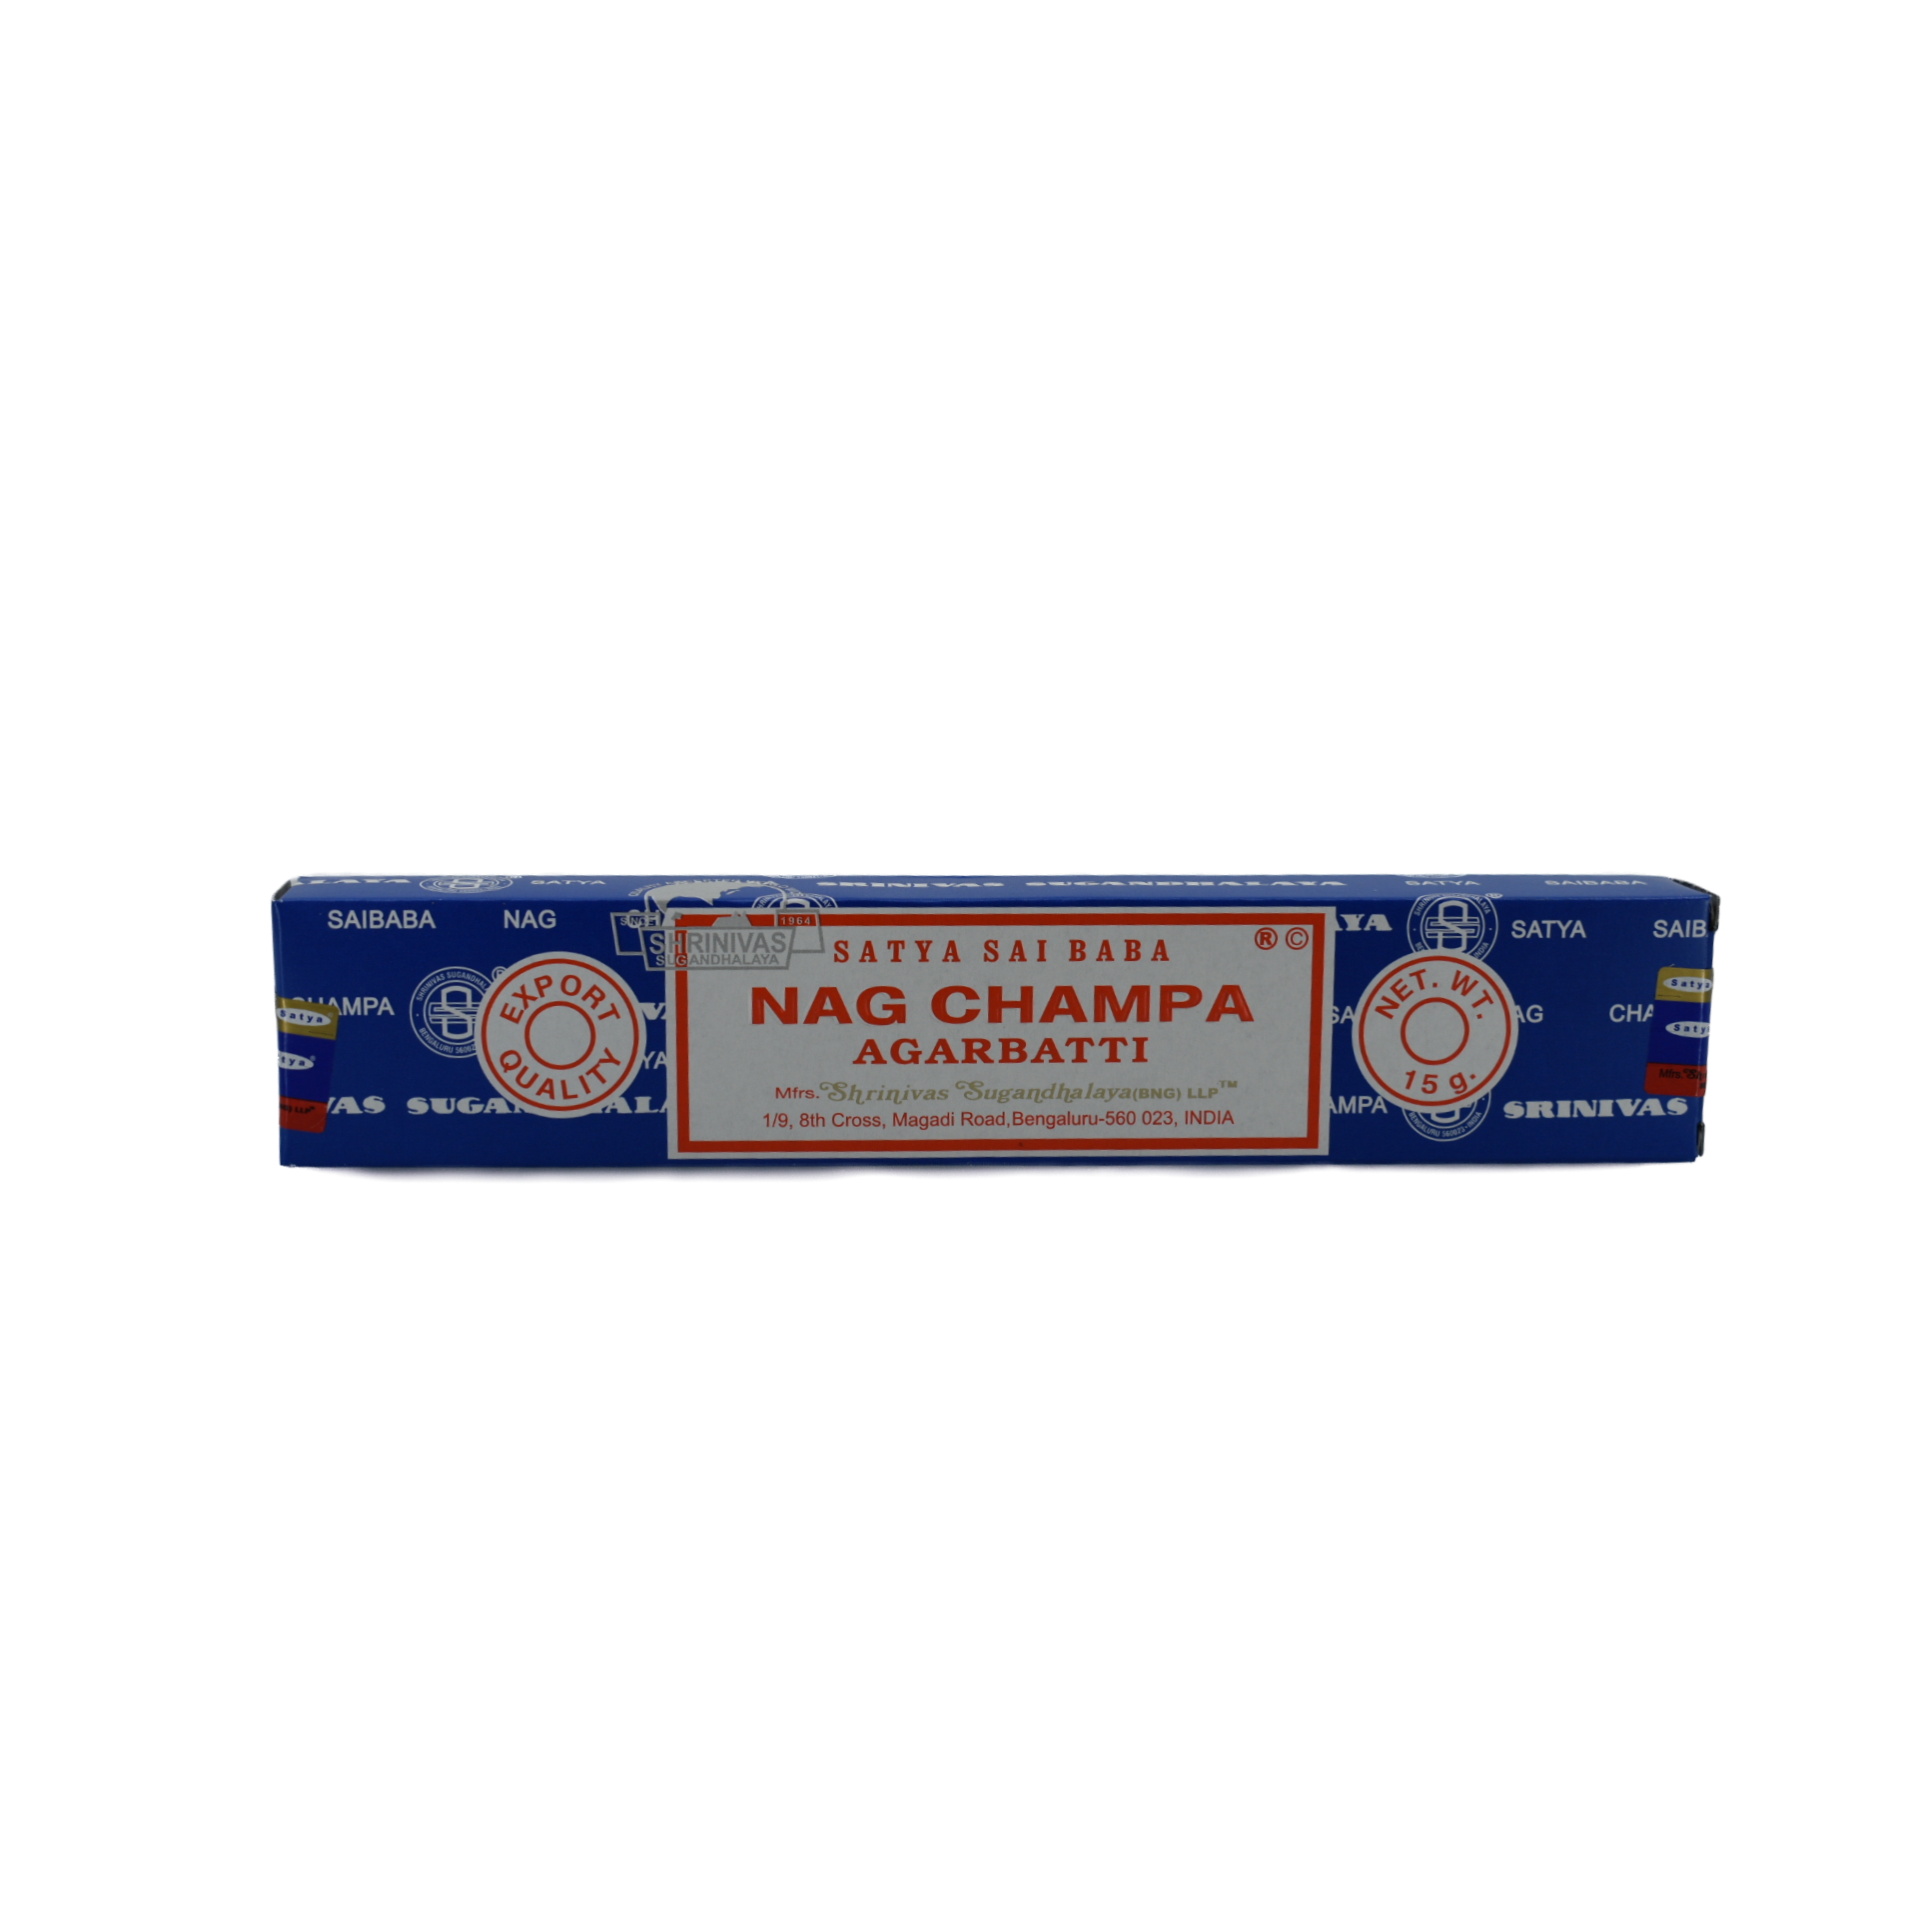 Nag Champa 15gr Sai Baba Incense Sticks. A dark blue box with a white rectangle in the middle. The red lettering and frame just inside the border. The lettering has the company name and title; Satya Sai Baba, Nag Champa, Agarbatti. Below the title is the manufacturer's information listed. In the lower right corner of the rectangle is the certified green product emblem. There are two circles, one on each side of the rectangle. The left circle says Export Quality and the right circle says Net Weight 15 grams.